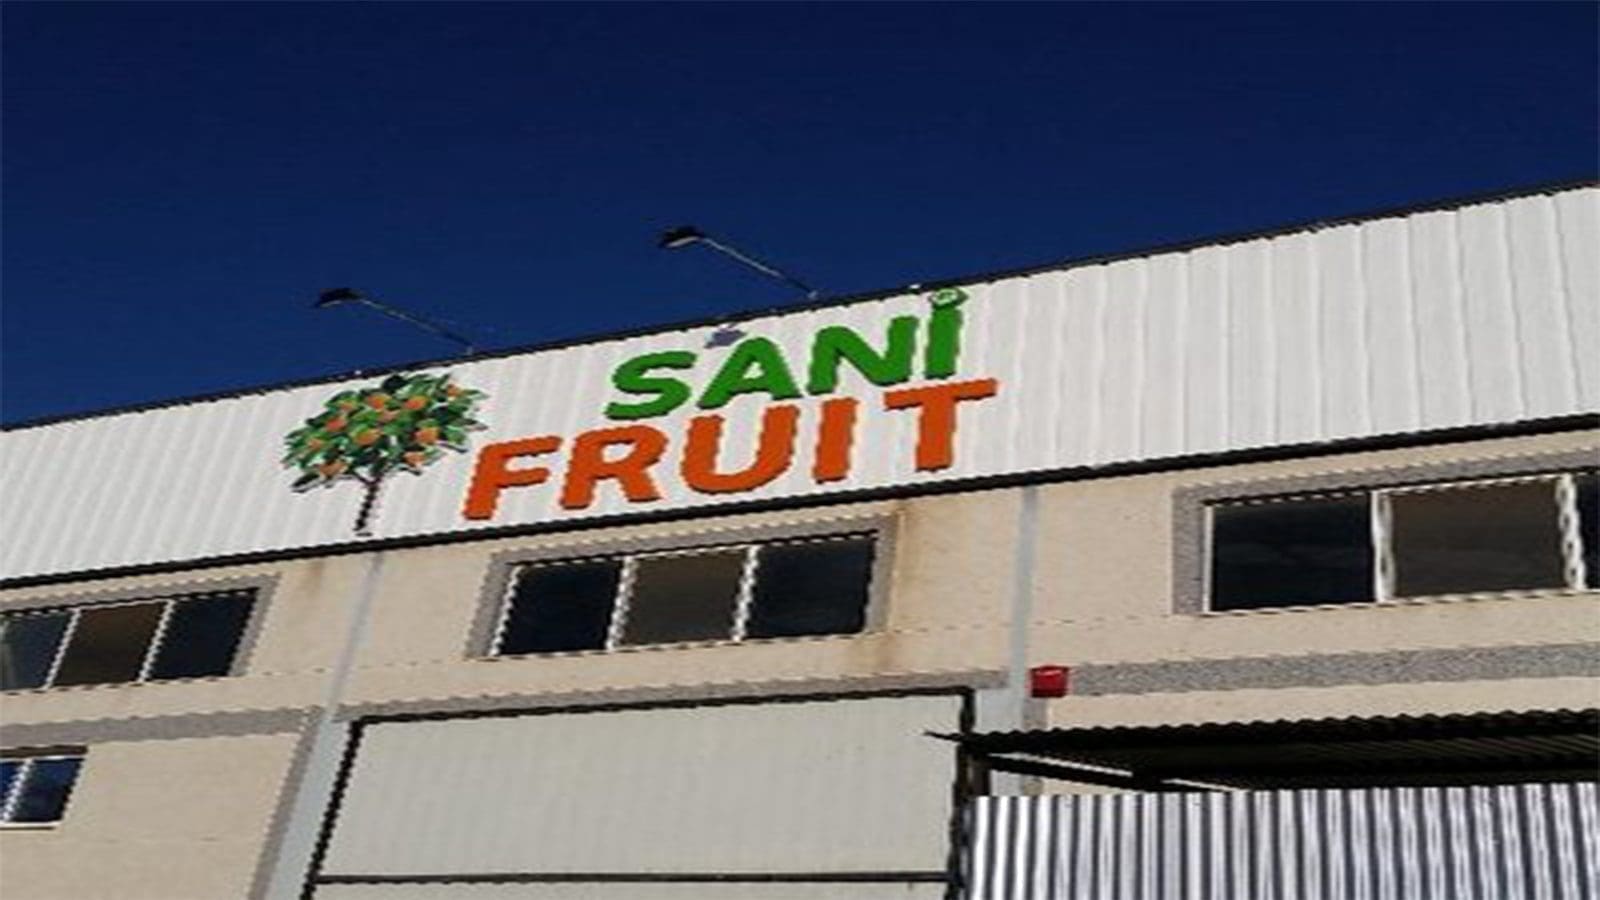 Sanifruit develops a new chem-free postharvest solution for apples, pears to prevent food waste